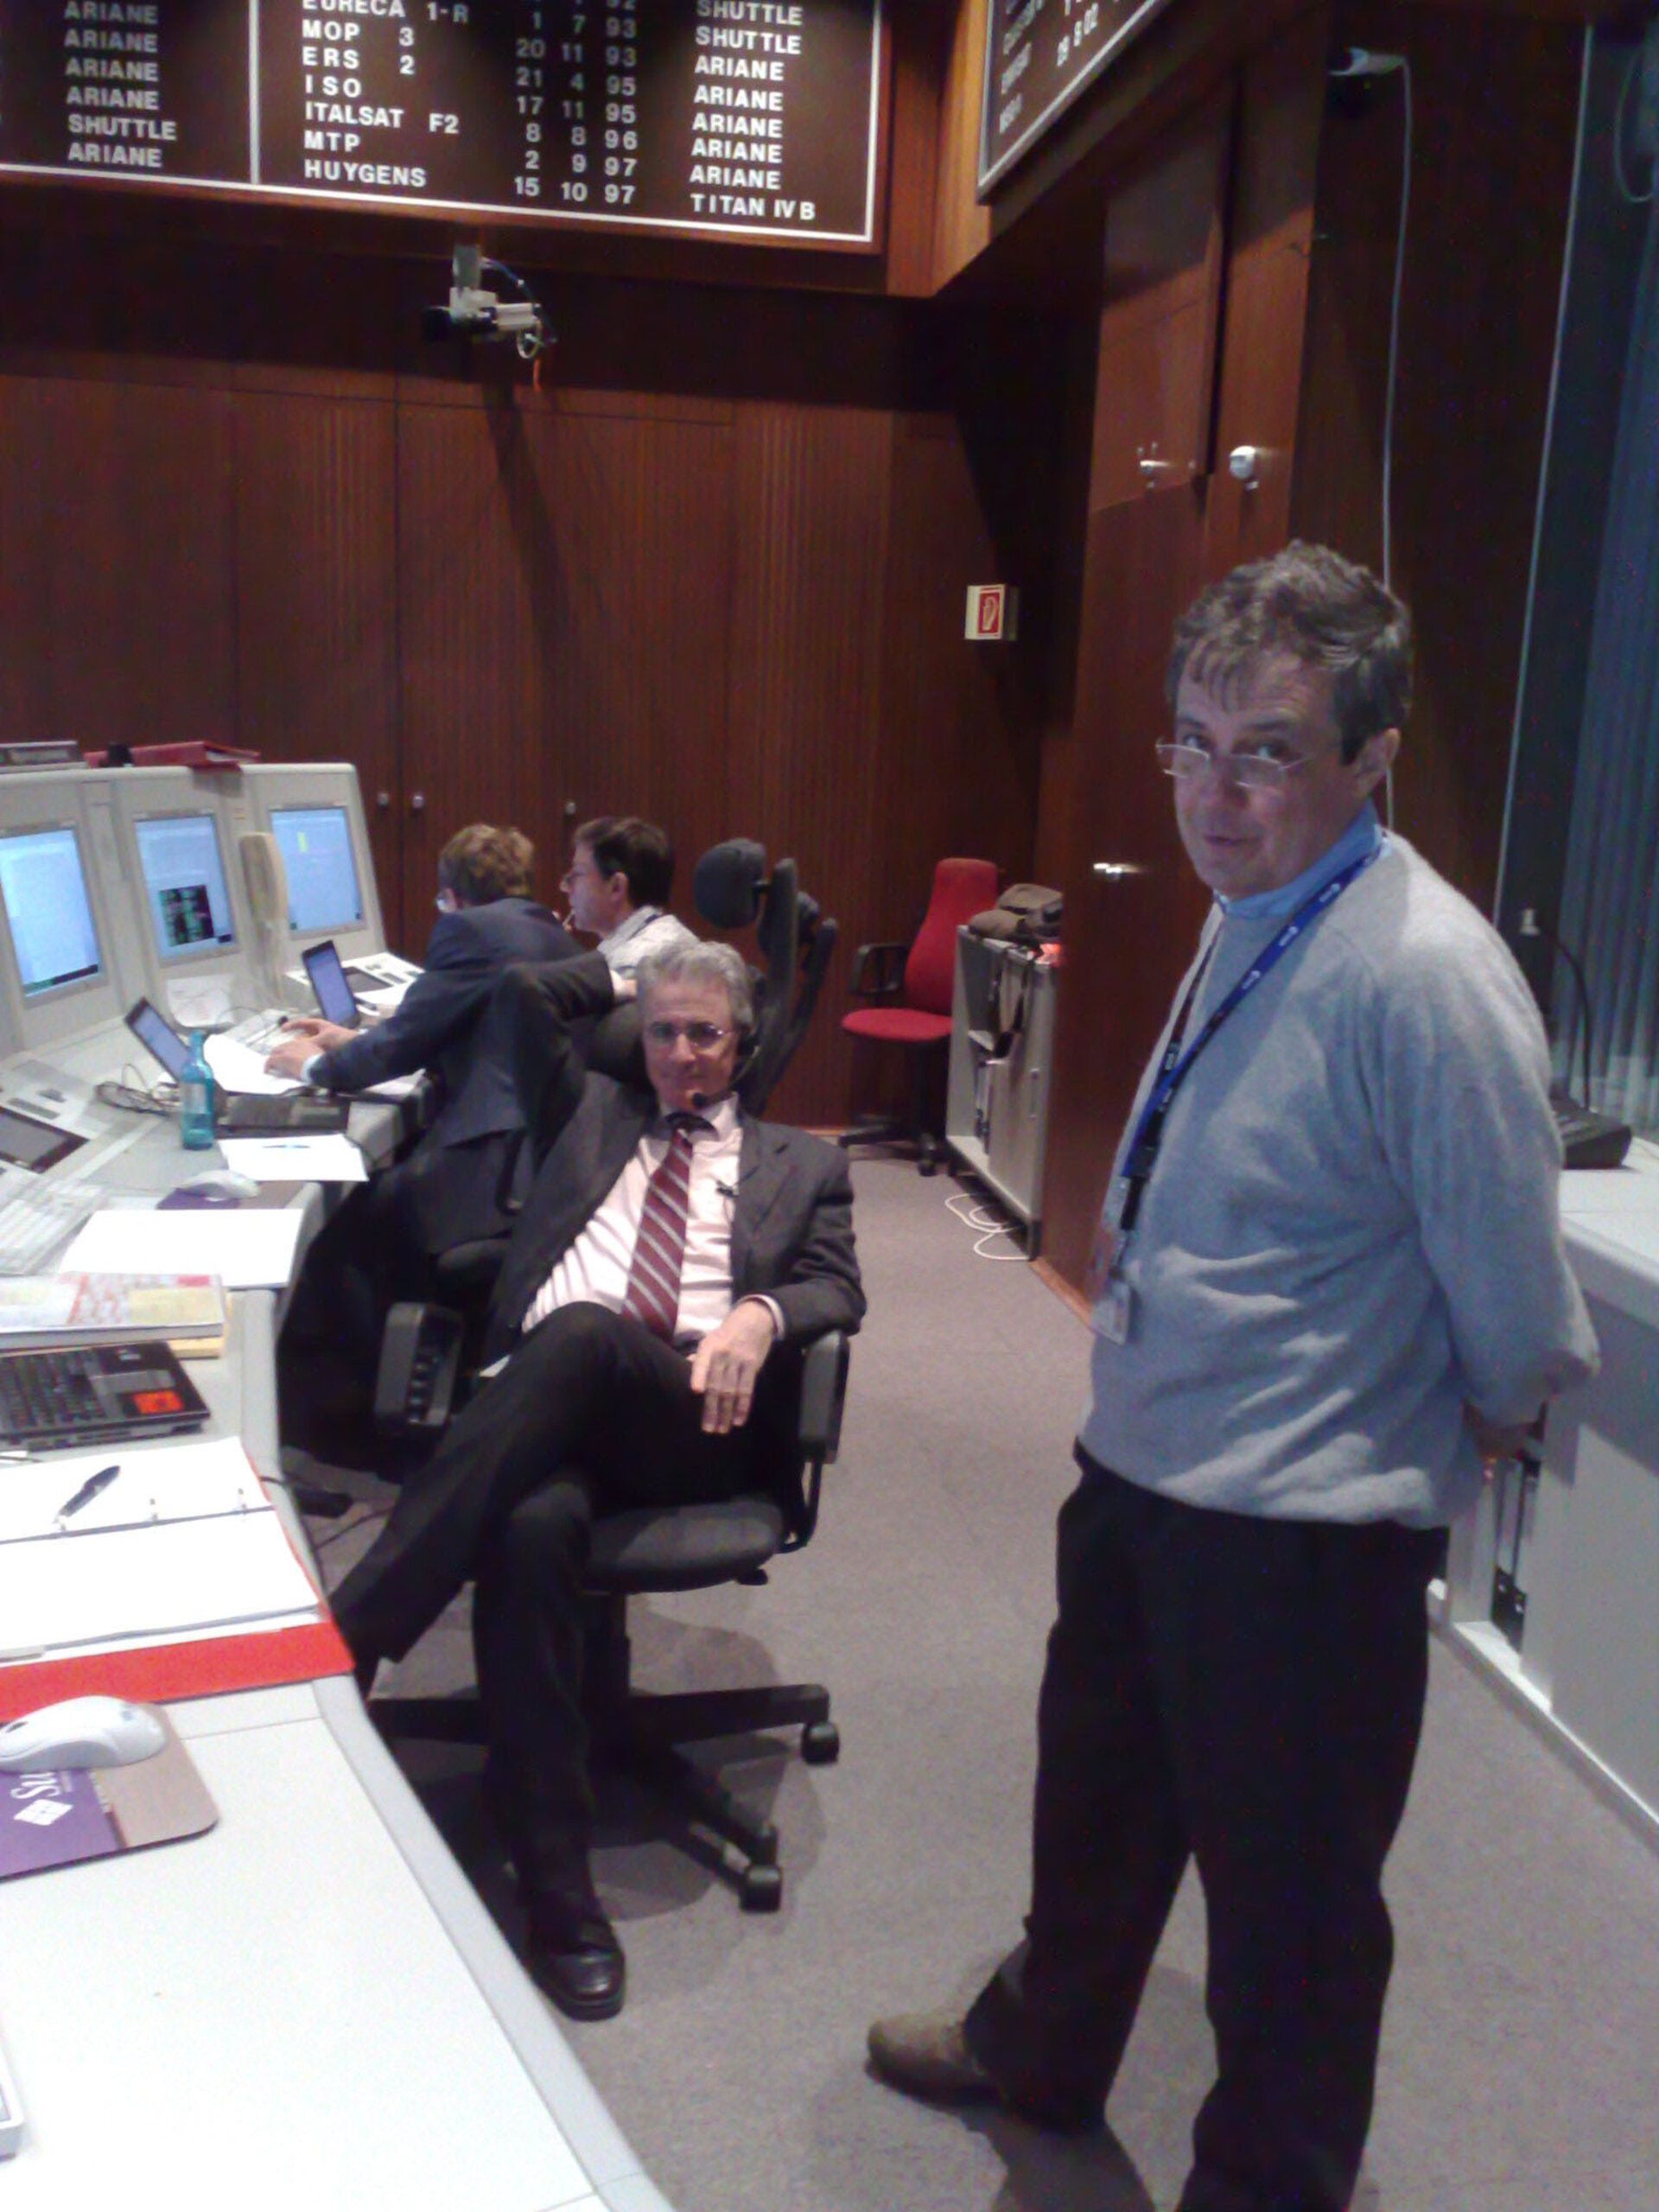 Deputy Flight Operations Director P. Ferri (seated) and FOD Pier-Paolo Emanuelli (standing)